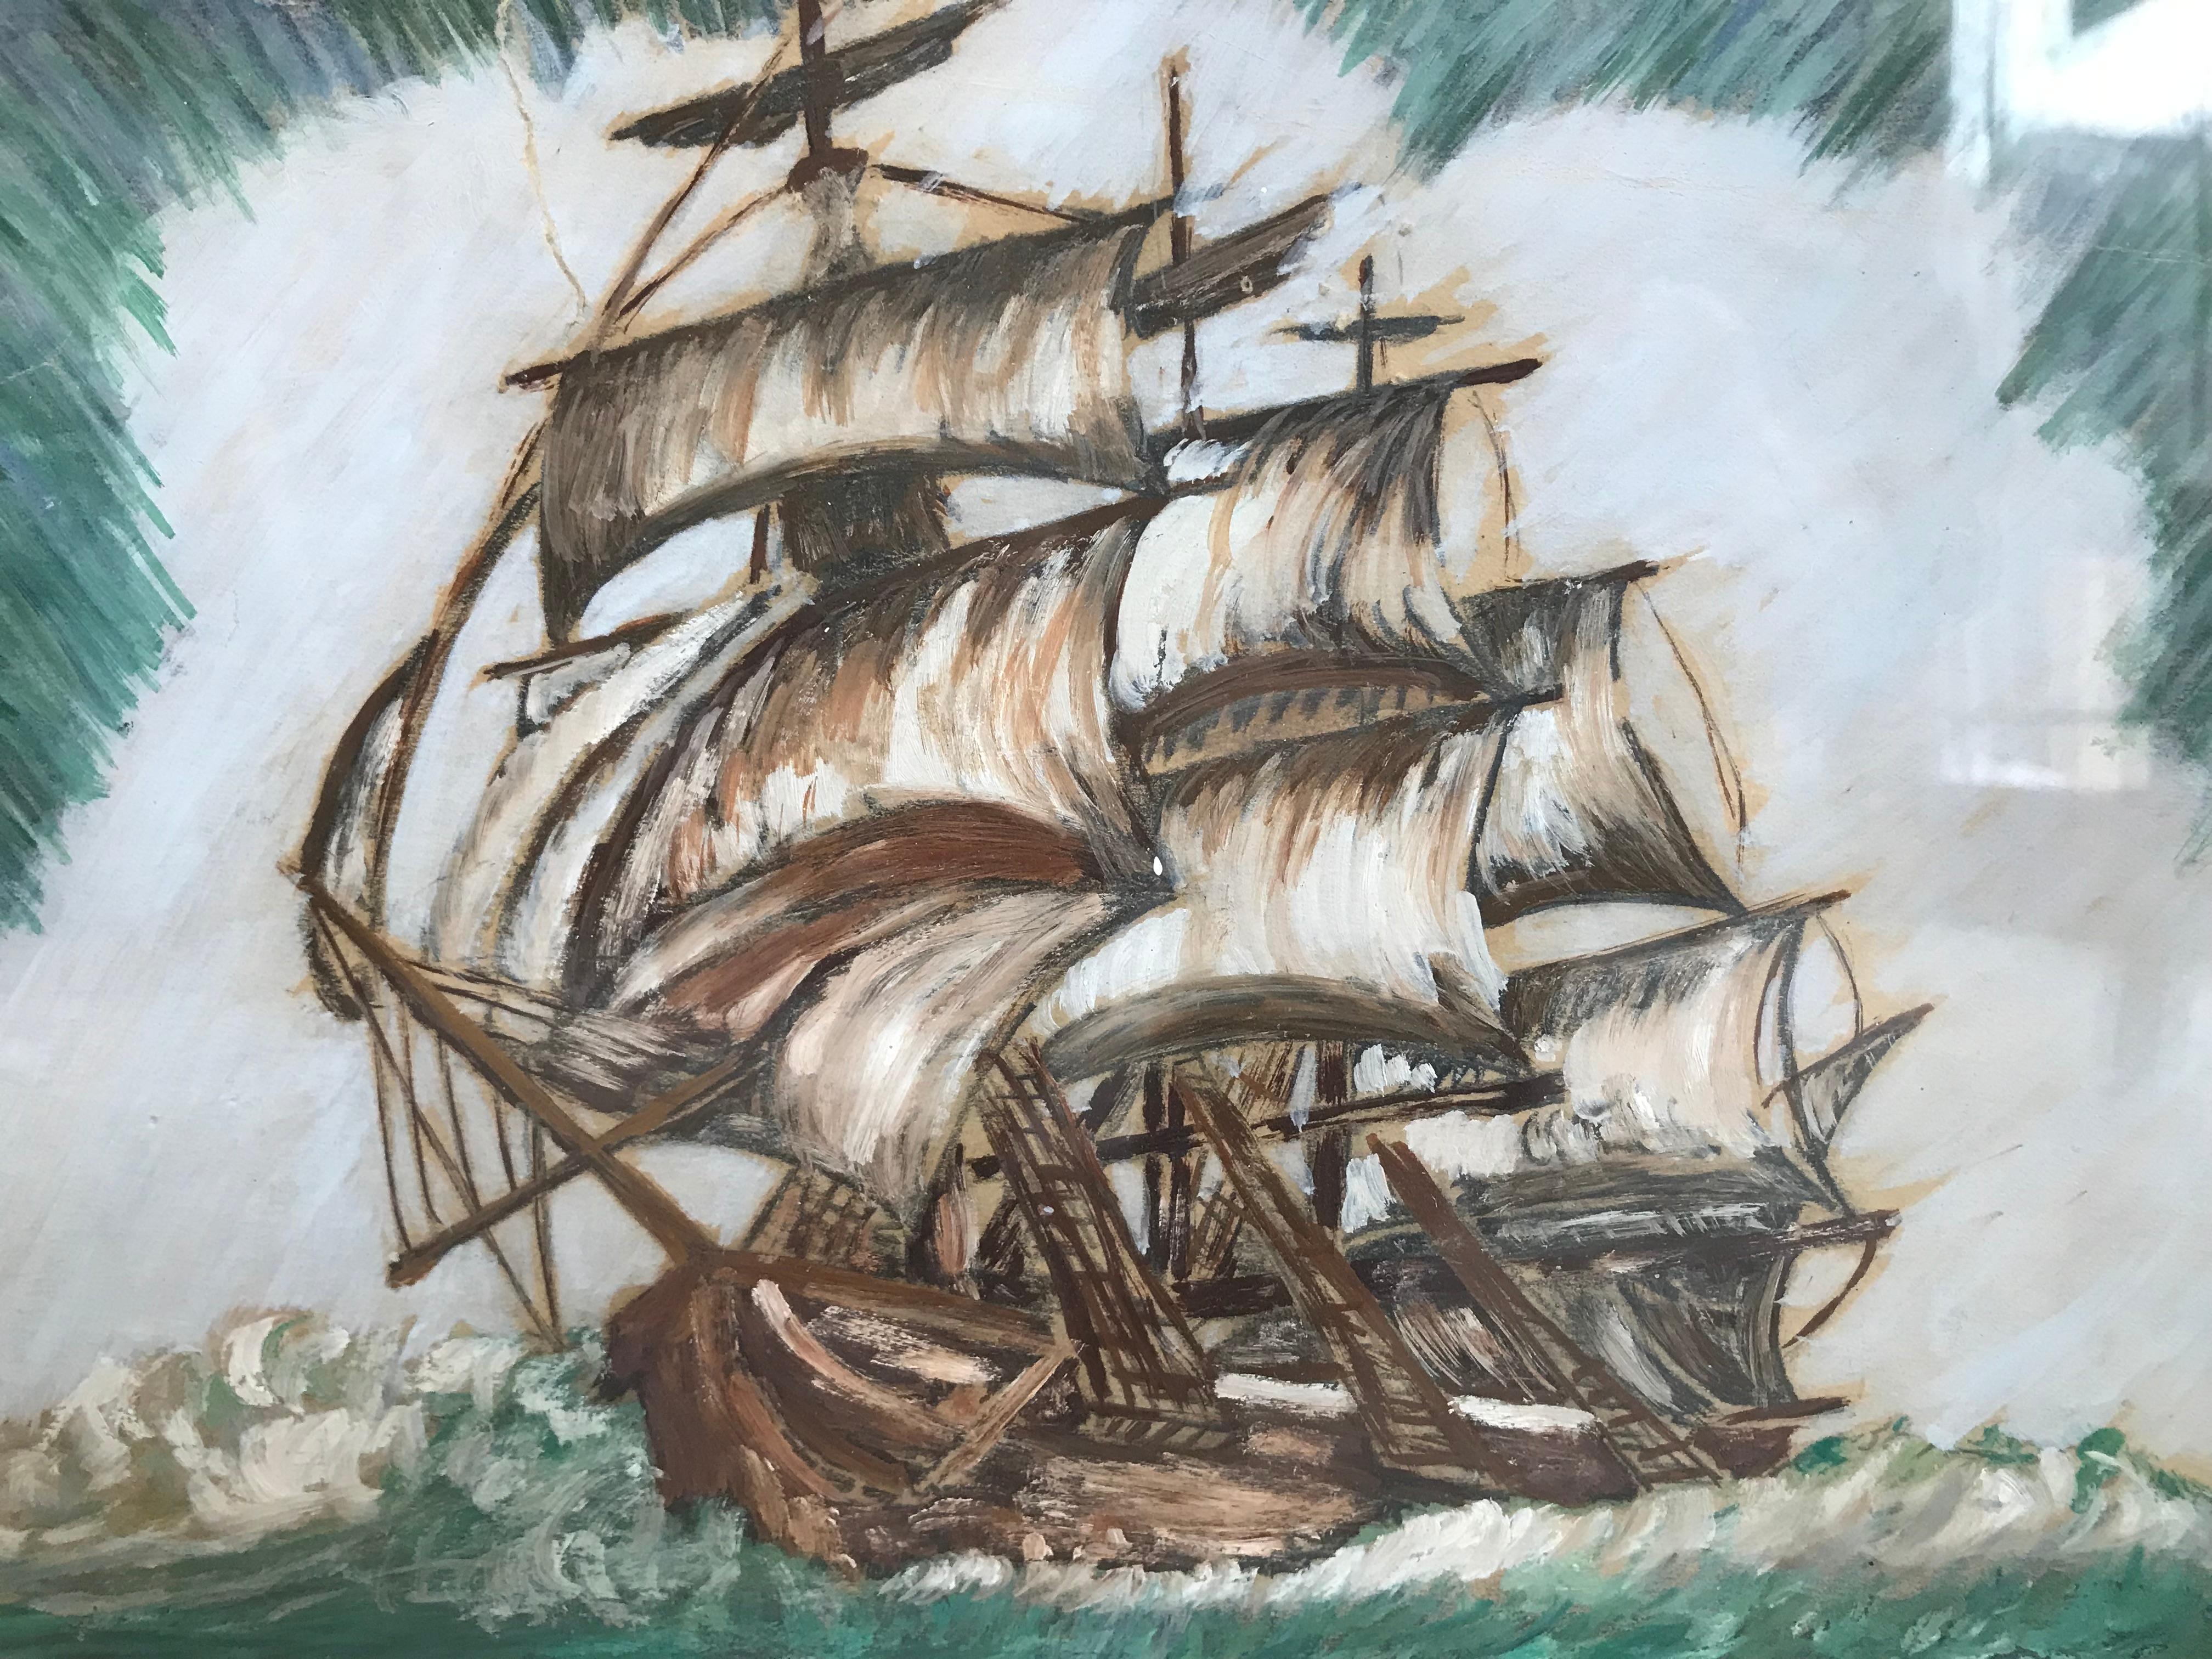 3 masted schooner ship on the water - Academic Art by Unknown